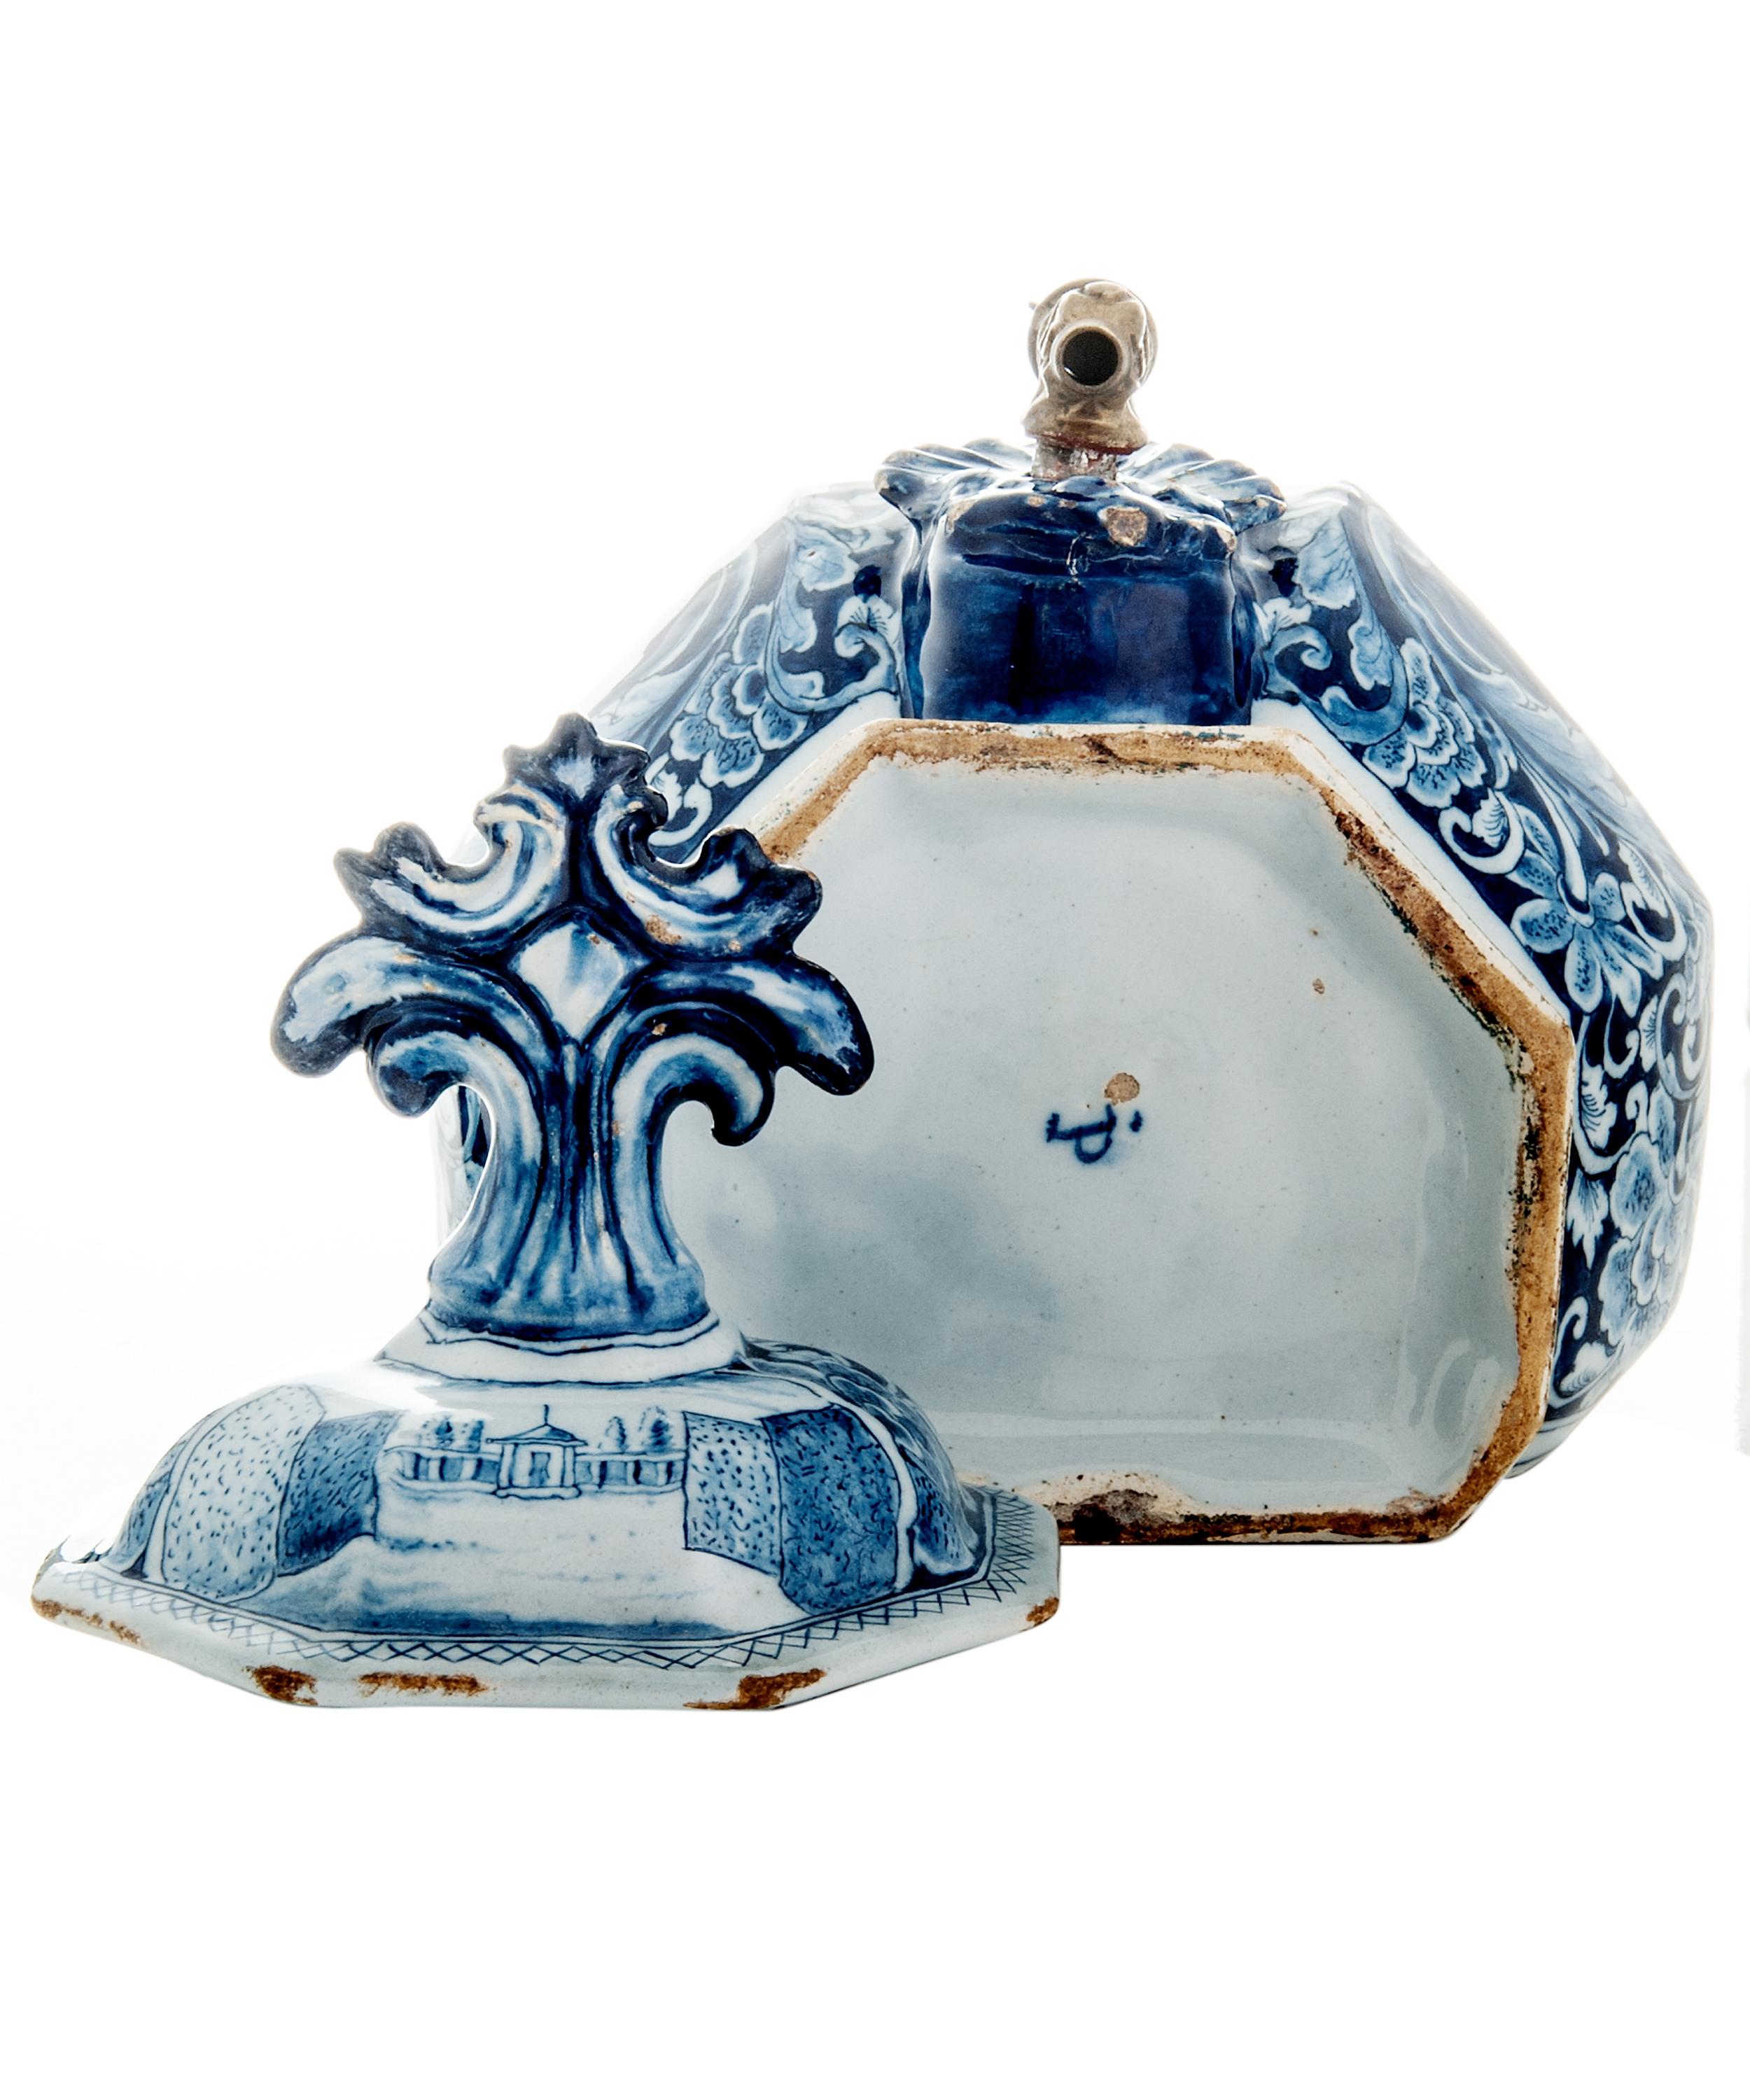 Wall-Fountain in Bleu and White Dutch Delft In Excellent Condition For Sale In Amsterdam, NL